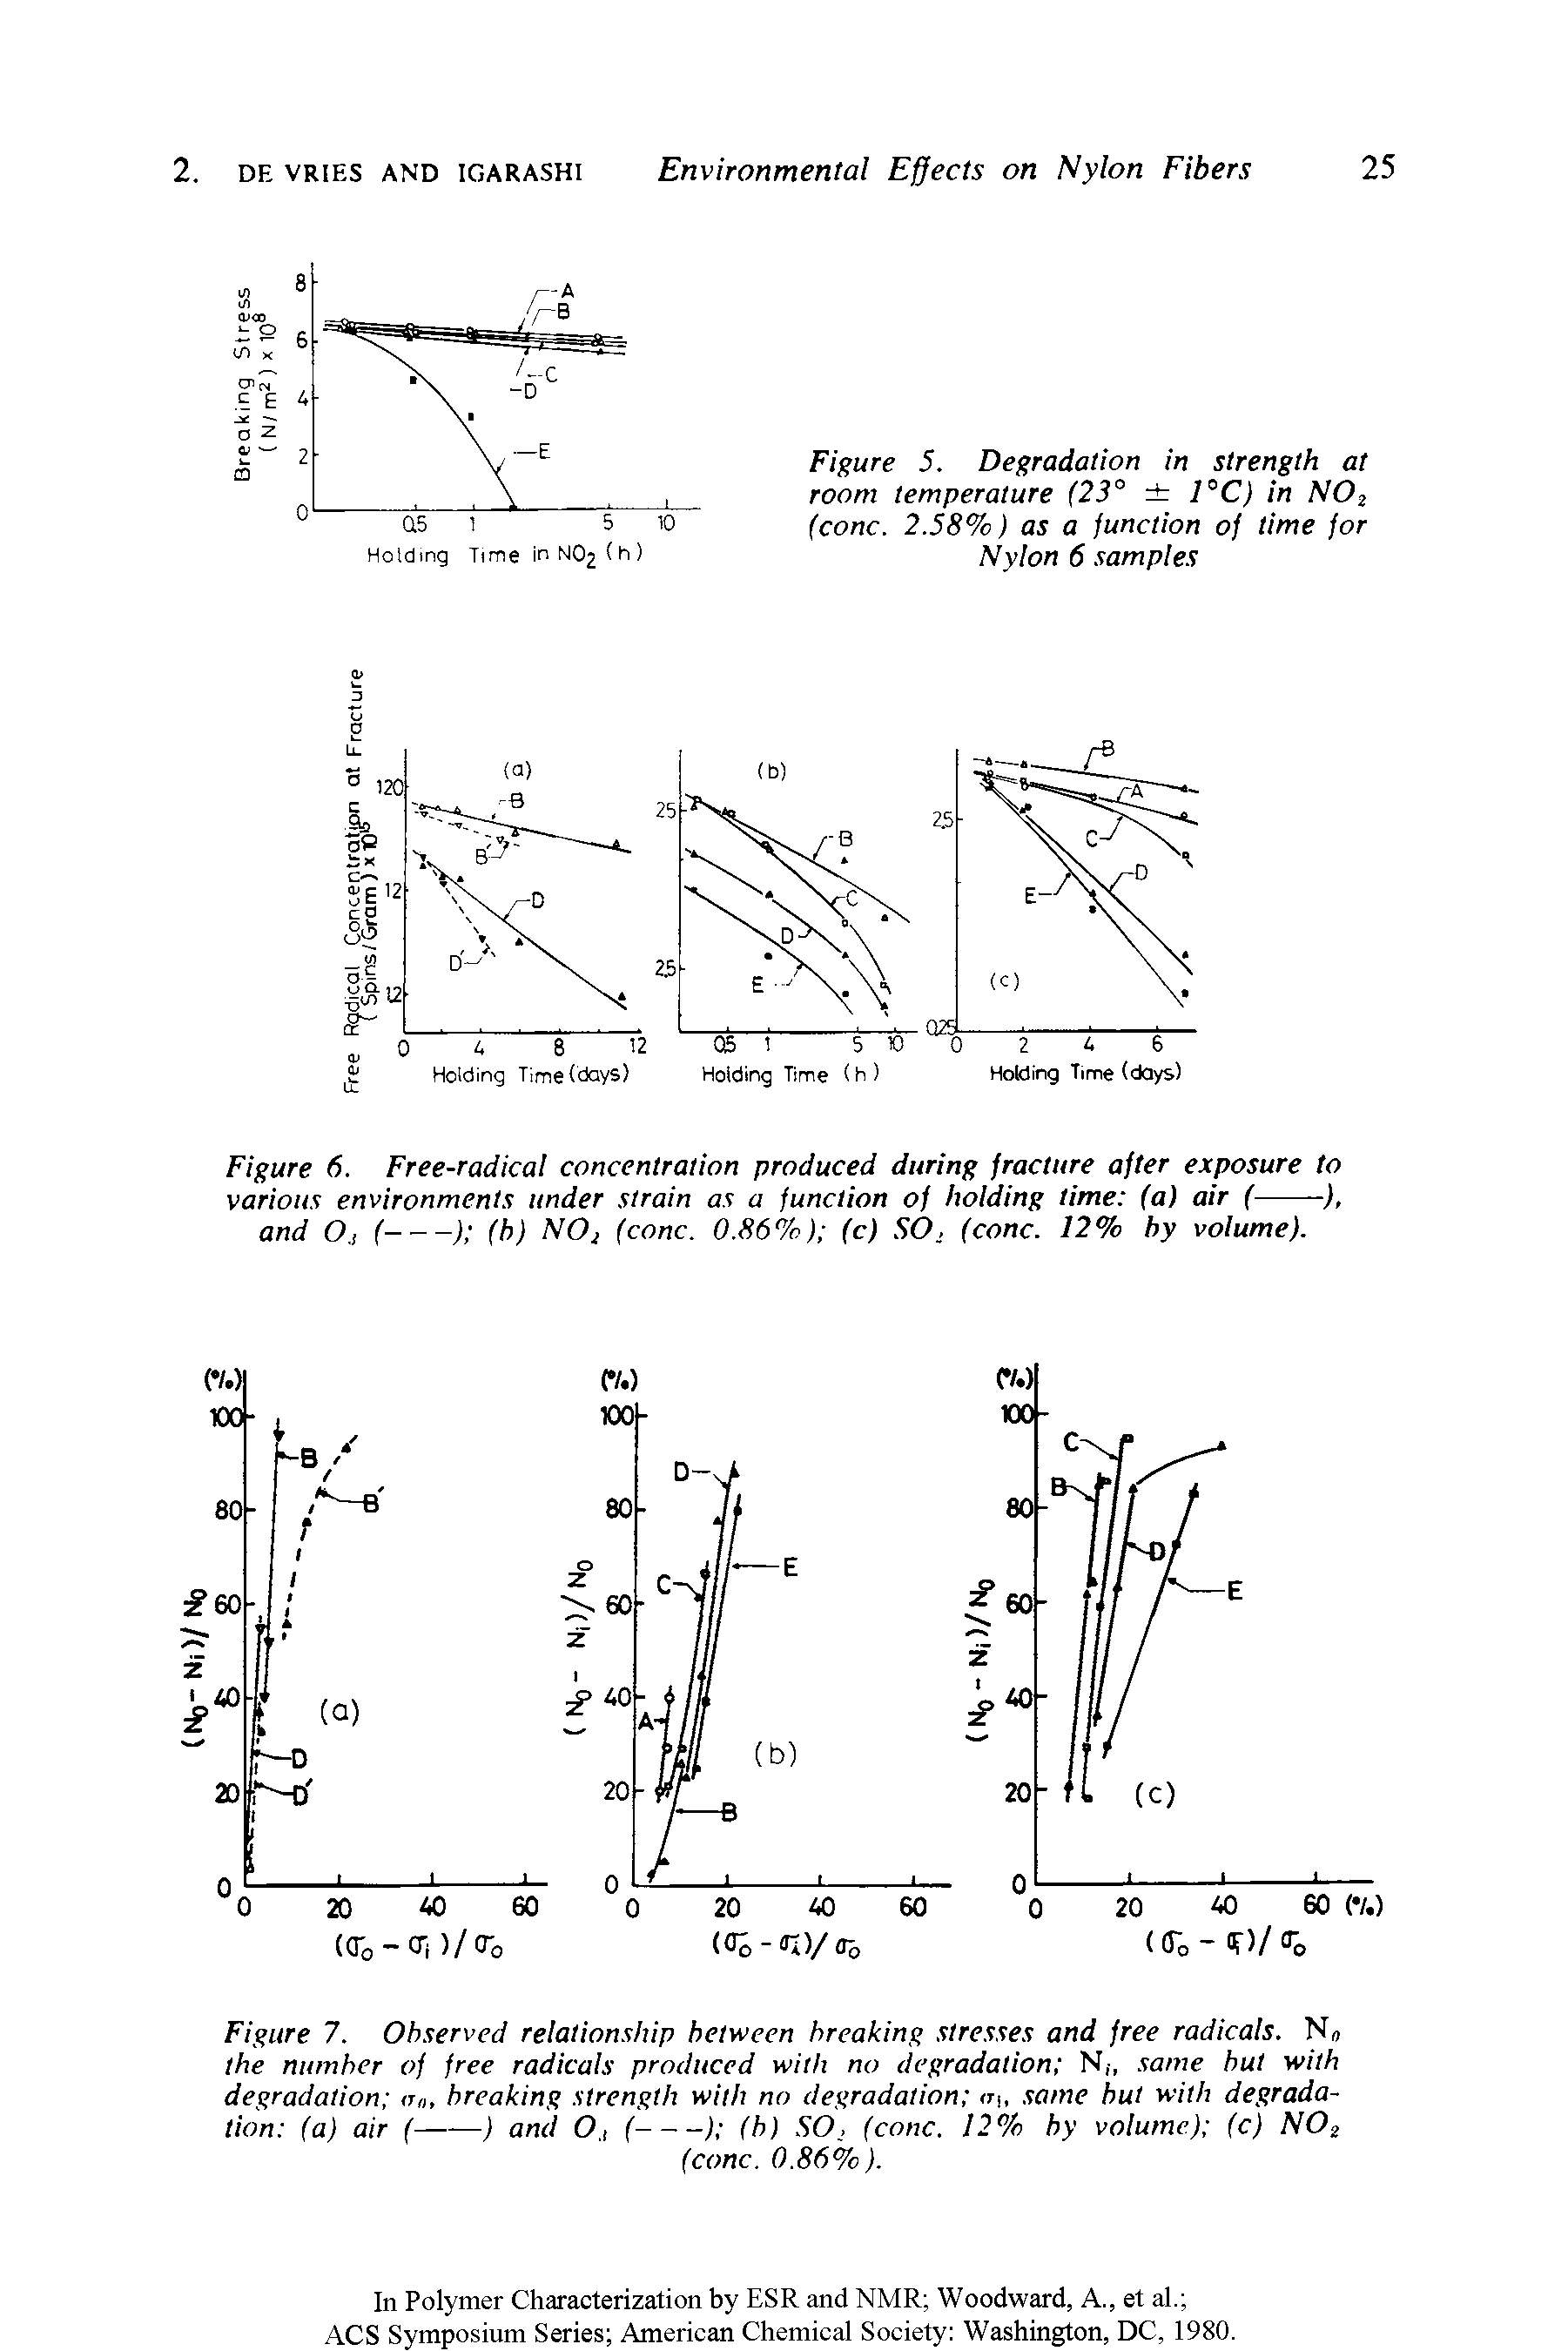 Figure 7. Observed relationship between breaking stresses and free radicals. No the number of free radicals produced with no degradation N,-, same but with degradation <t , breaking strength with no degradation nt, same but with degradation (a) air (----) and O(--------) (b) SO, (cone. 12% by volume) (c) NO,...